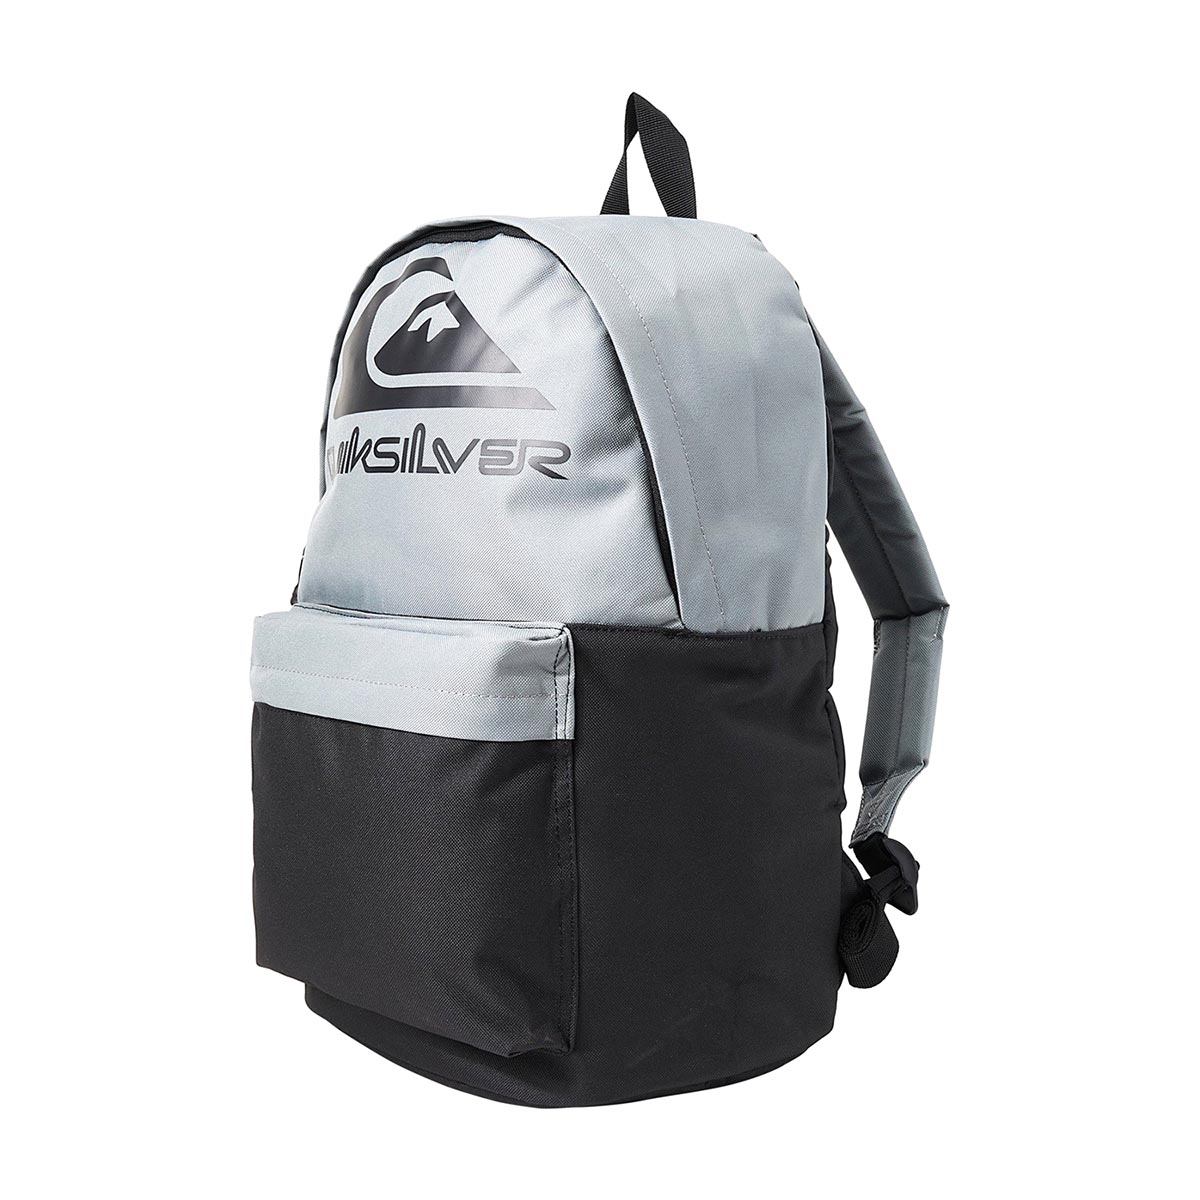 QUIKSILVER - THE POSTER MEDIUM BACKPACK 26 L